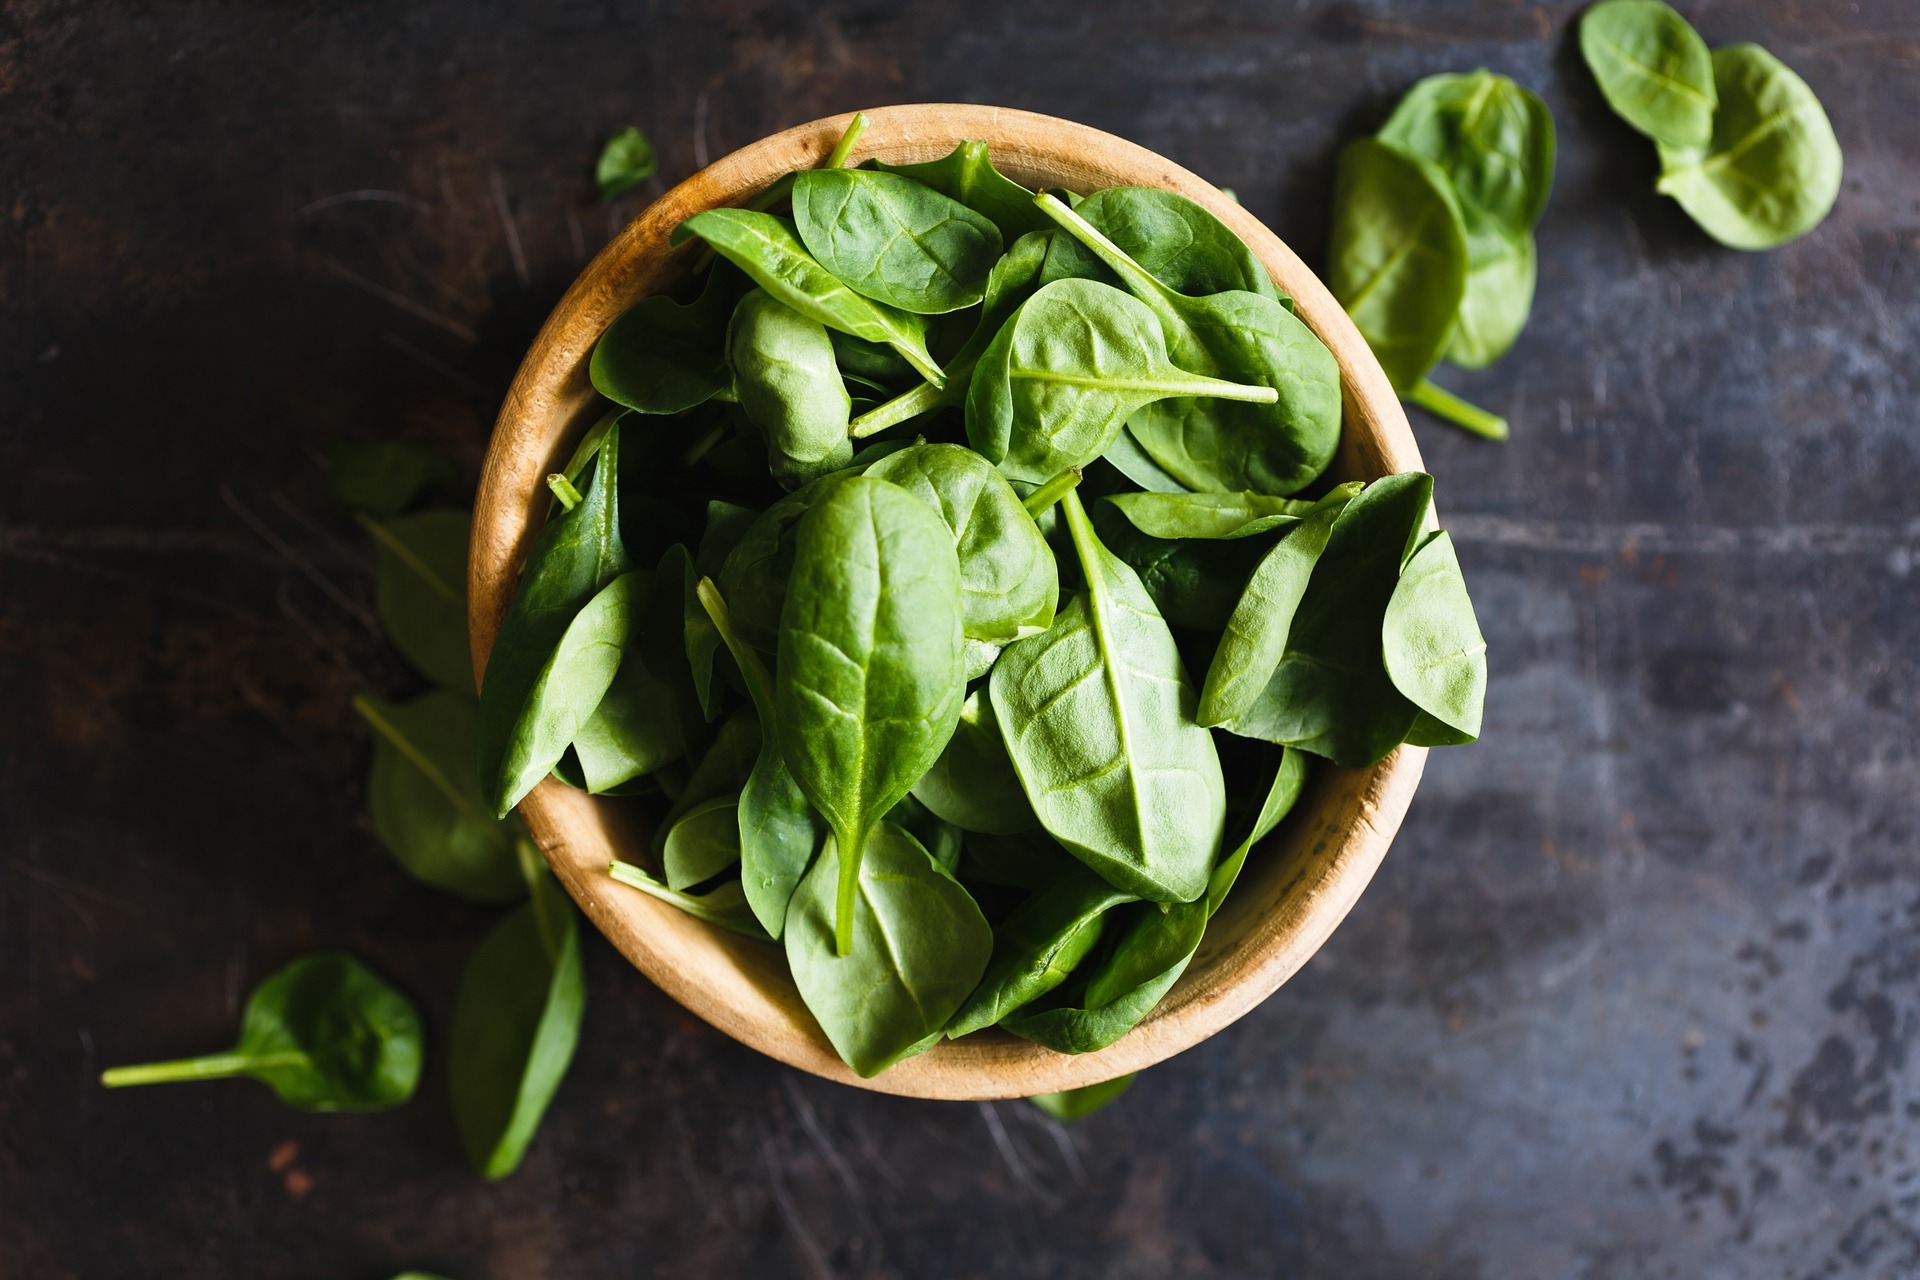 You can buy fresh herbs, such as basil, in many grocery stores and at farmers markets. (Photo courtesy of Pixabay)